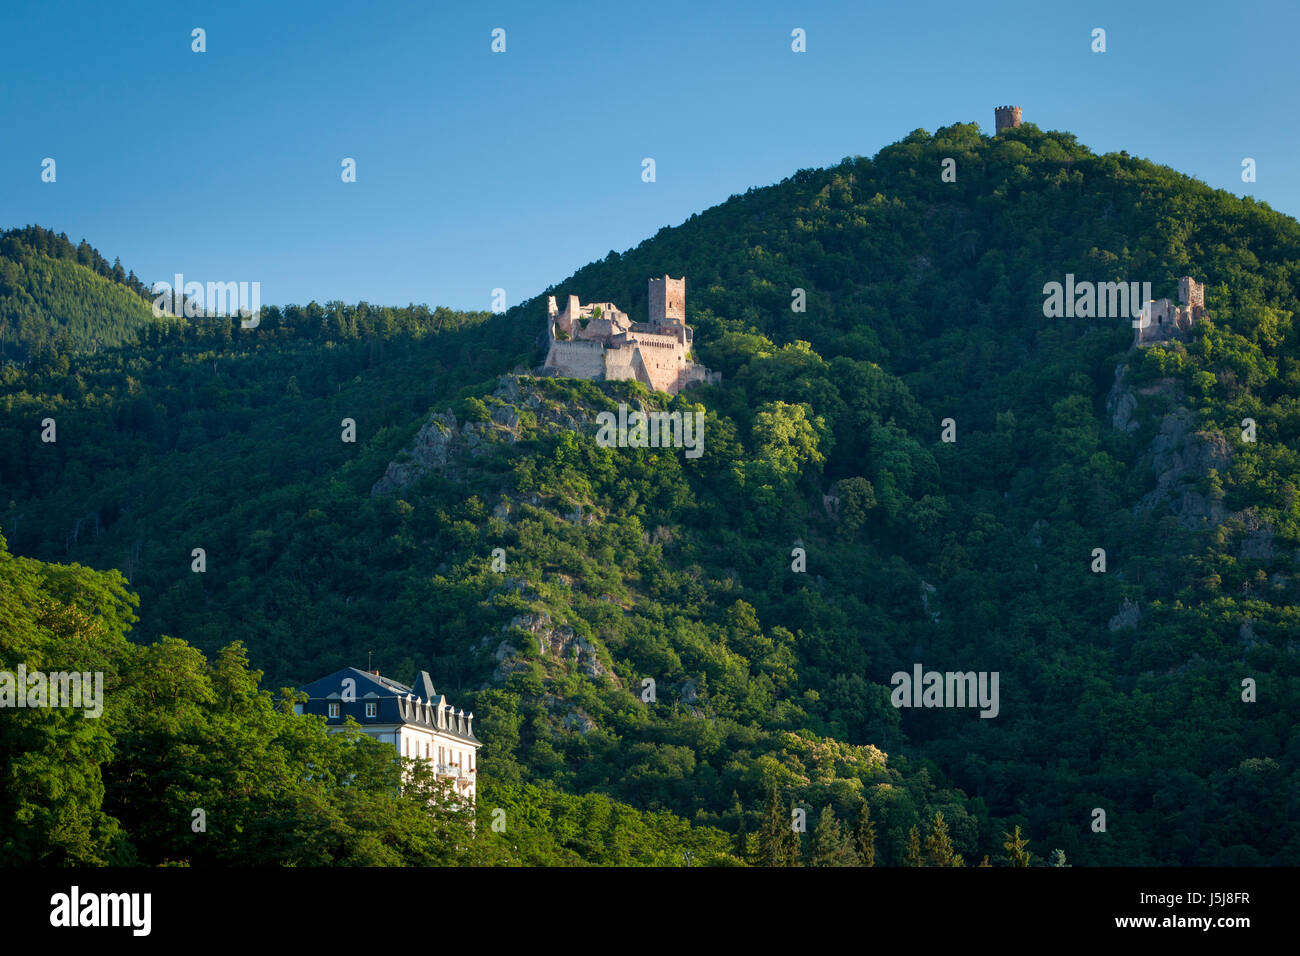 Ruins of Chateau du Girsberg and Chateau de Saint-Ulrich in the Vosges Mountains above Ribeauville, Alsace, France Stock Photo